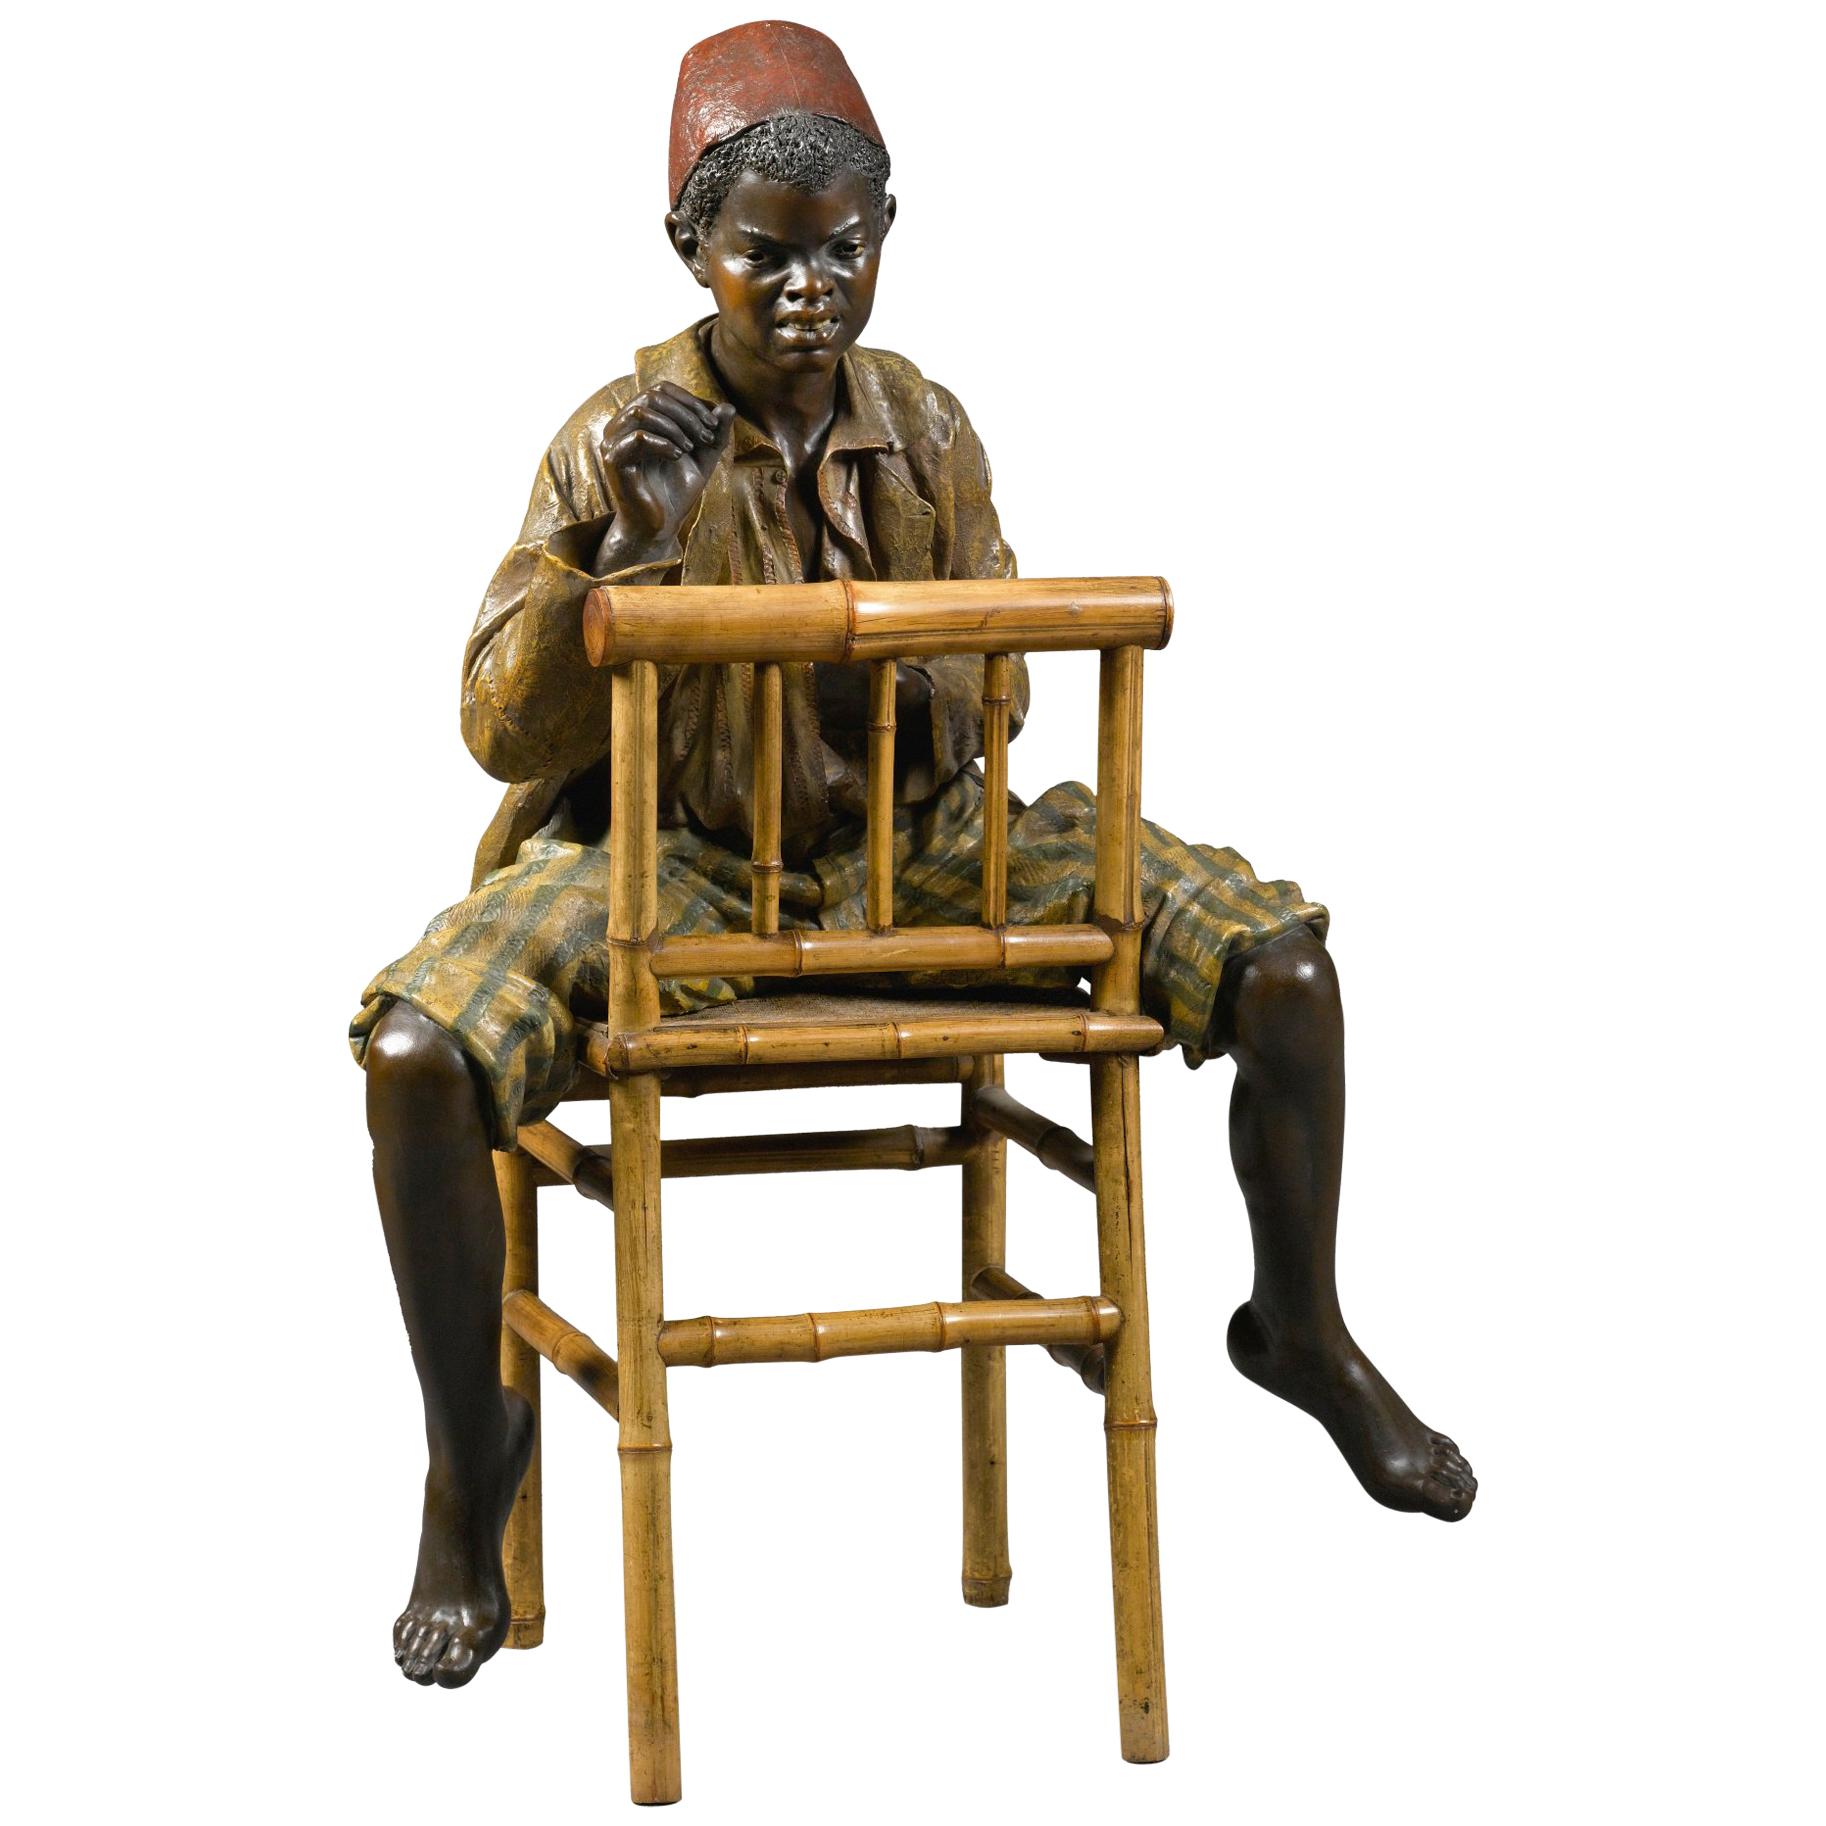 Bernhard Bloch, Life-Size Terracotta of a Boy from North Africa For Sale